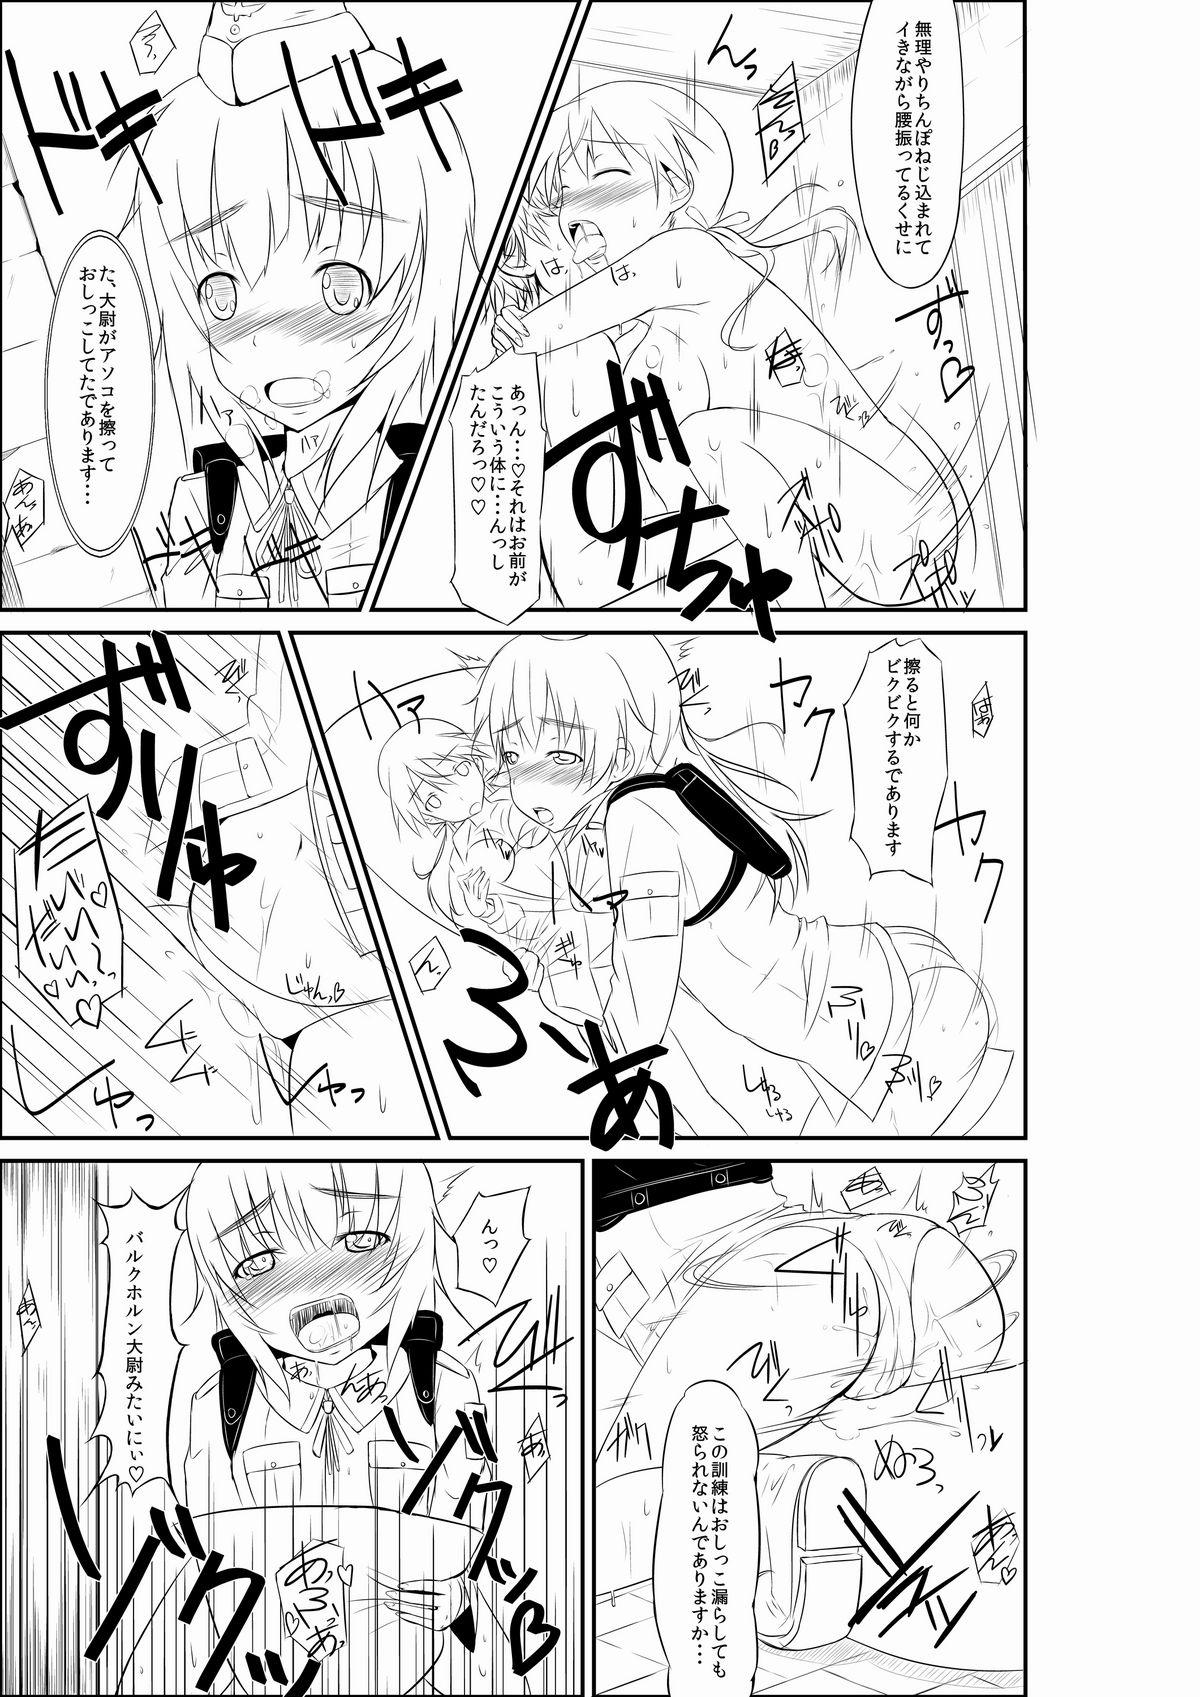 Mom 練習 お姉ちゃんとヘルマちゃん - Strike witches Super Hot Porn - Page 7